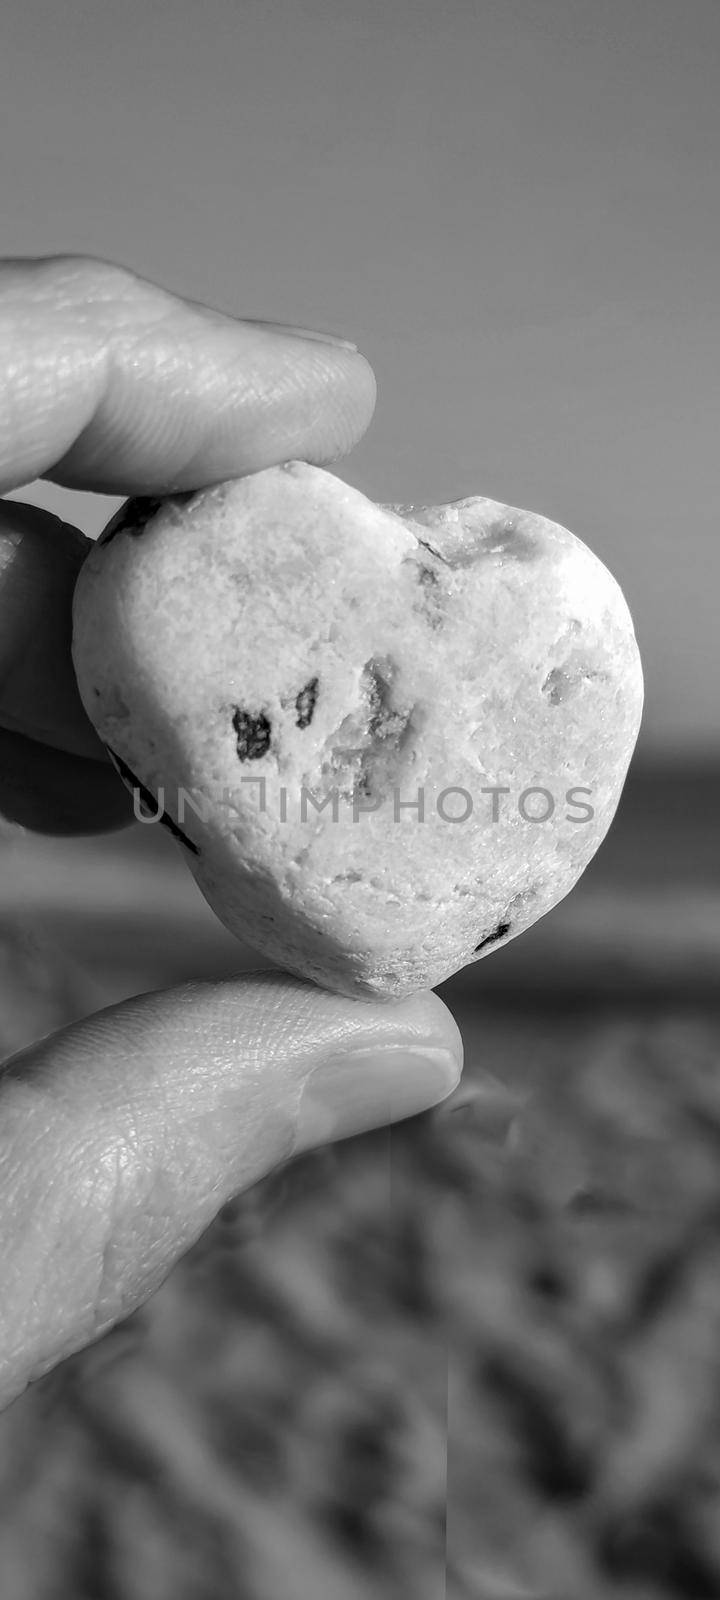 Stone heart in hand, close-up. Desktop for phone screensaver. Black and white